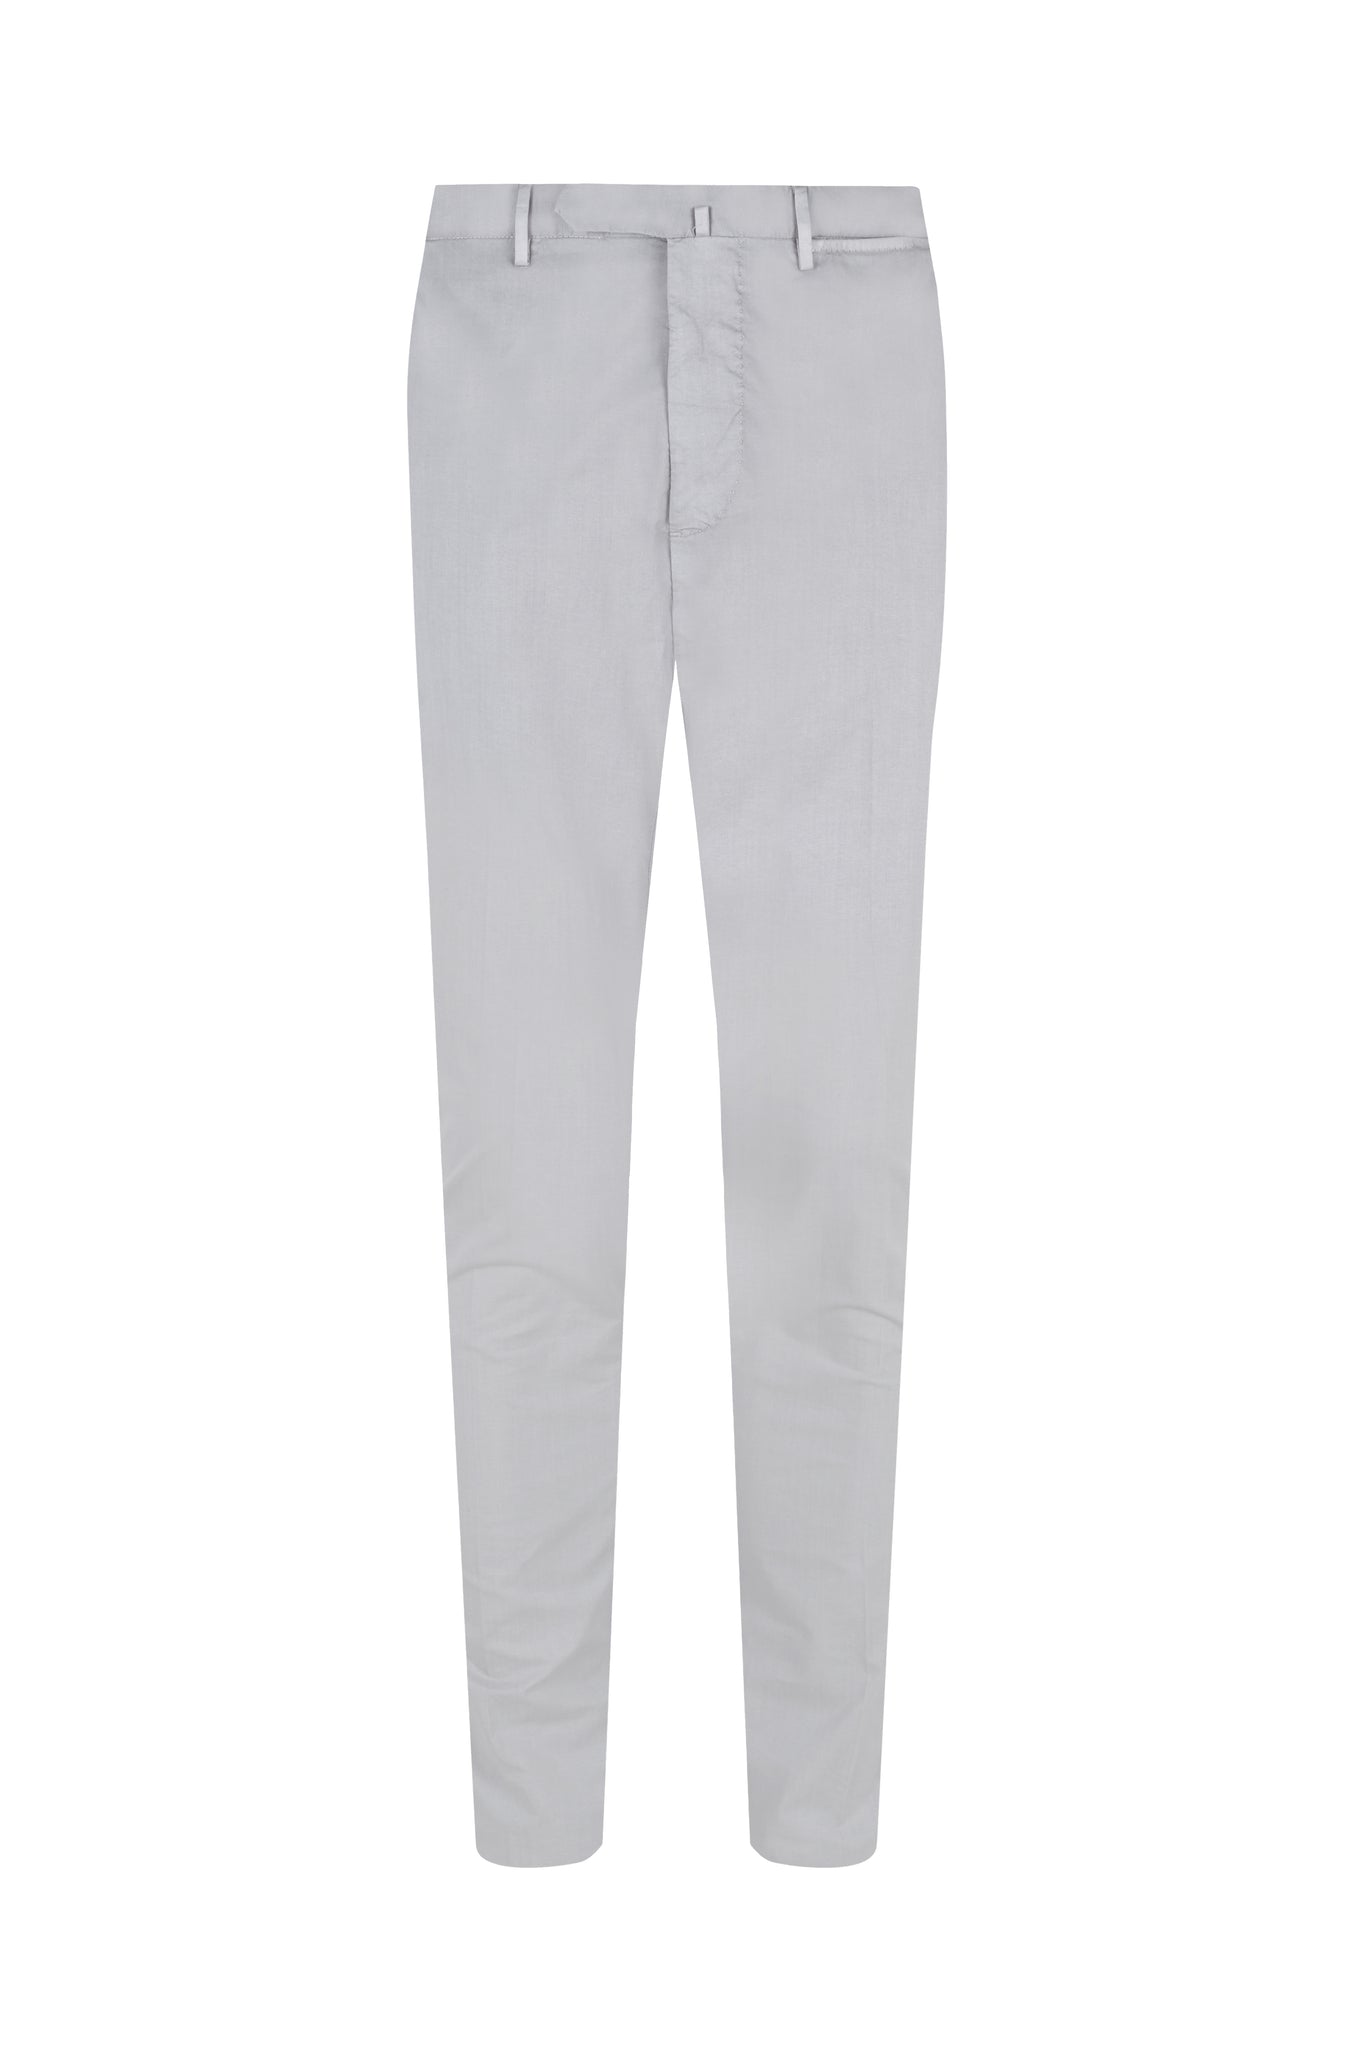 Extralight cotton stretch slim fit trousers